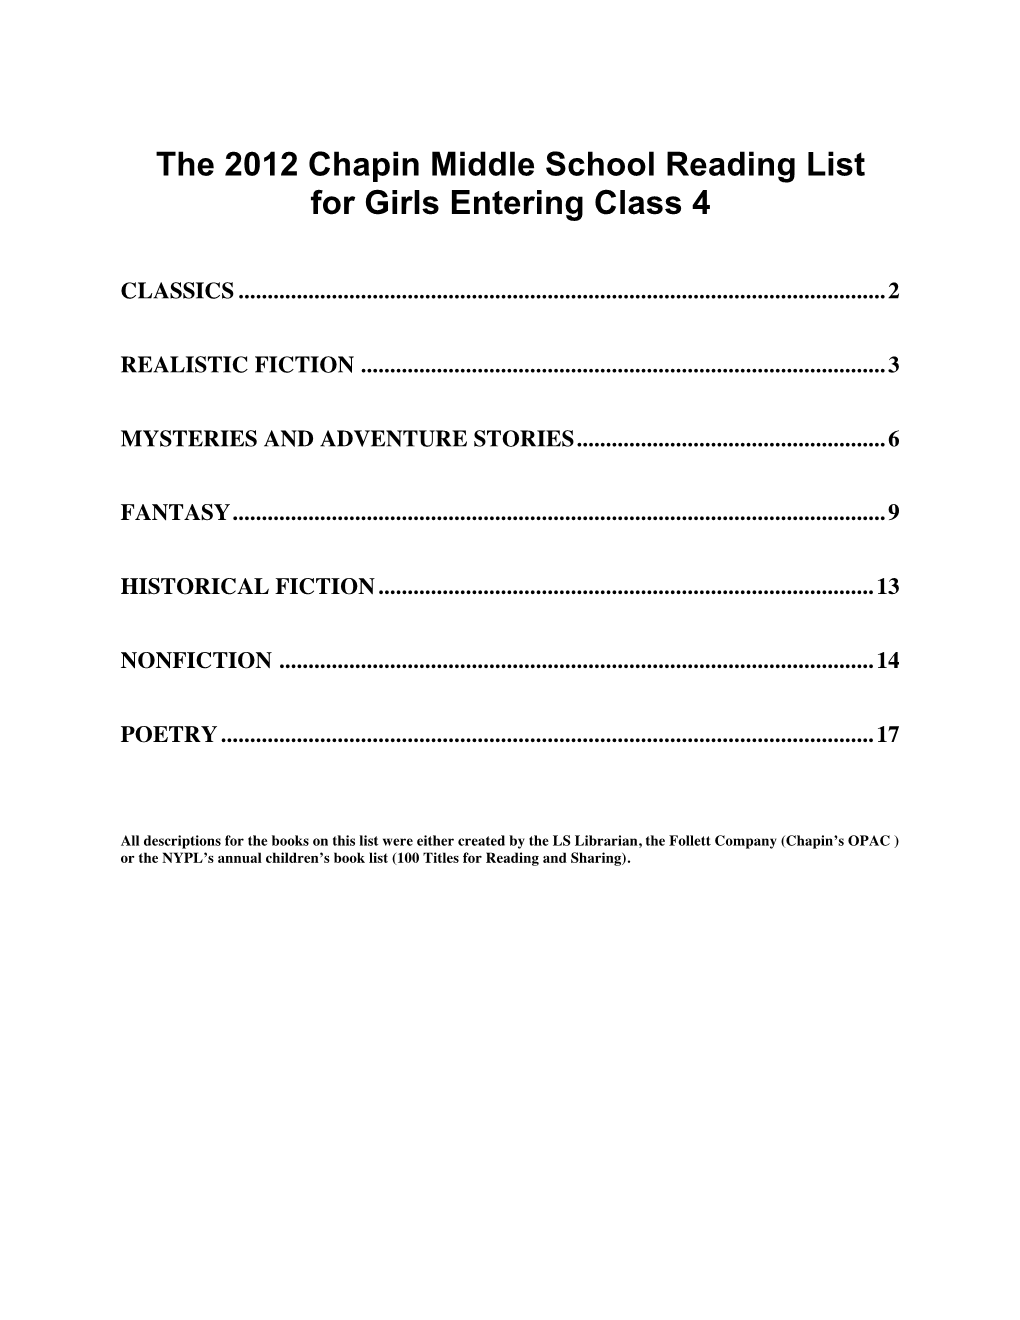 The 2012 Chapin Middle School Reading List for Girls Entering Class 4